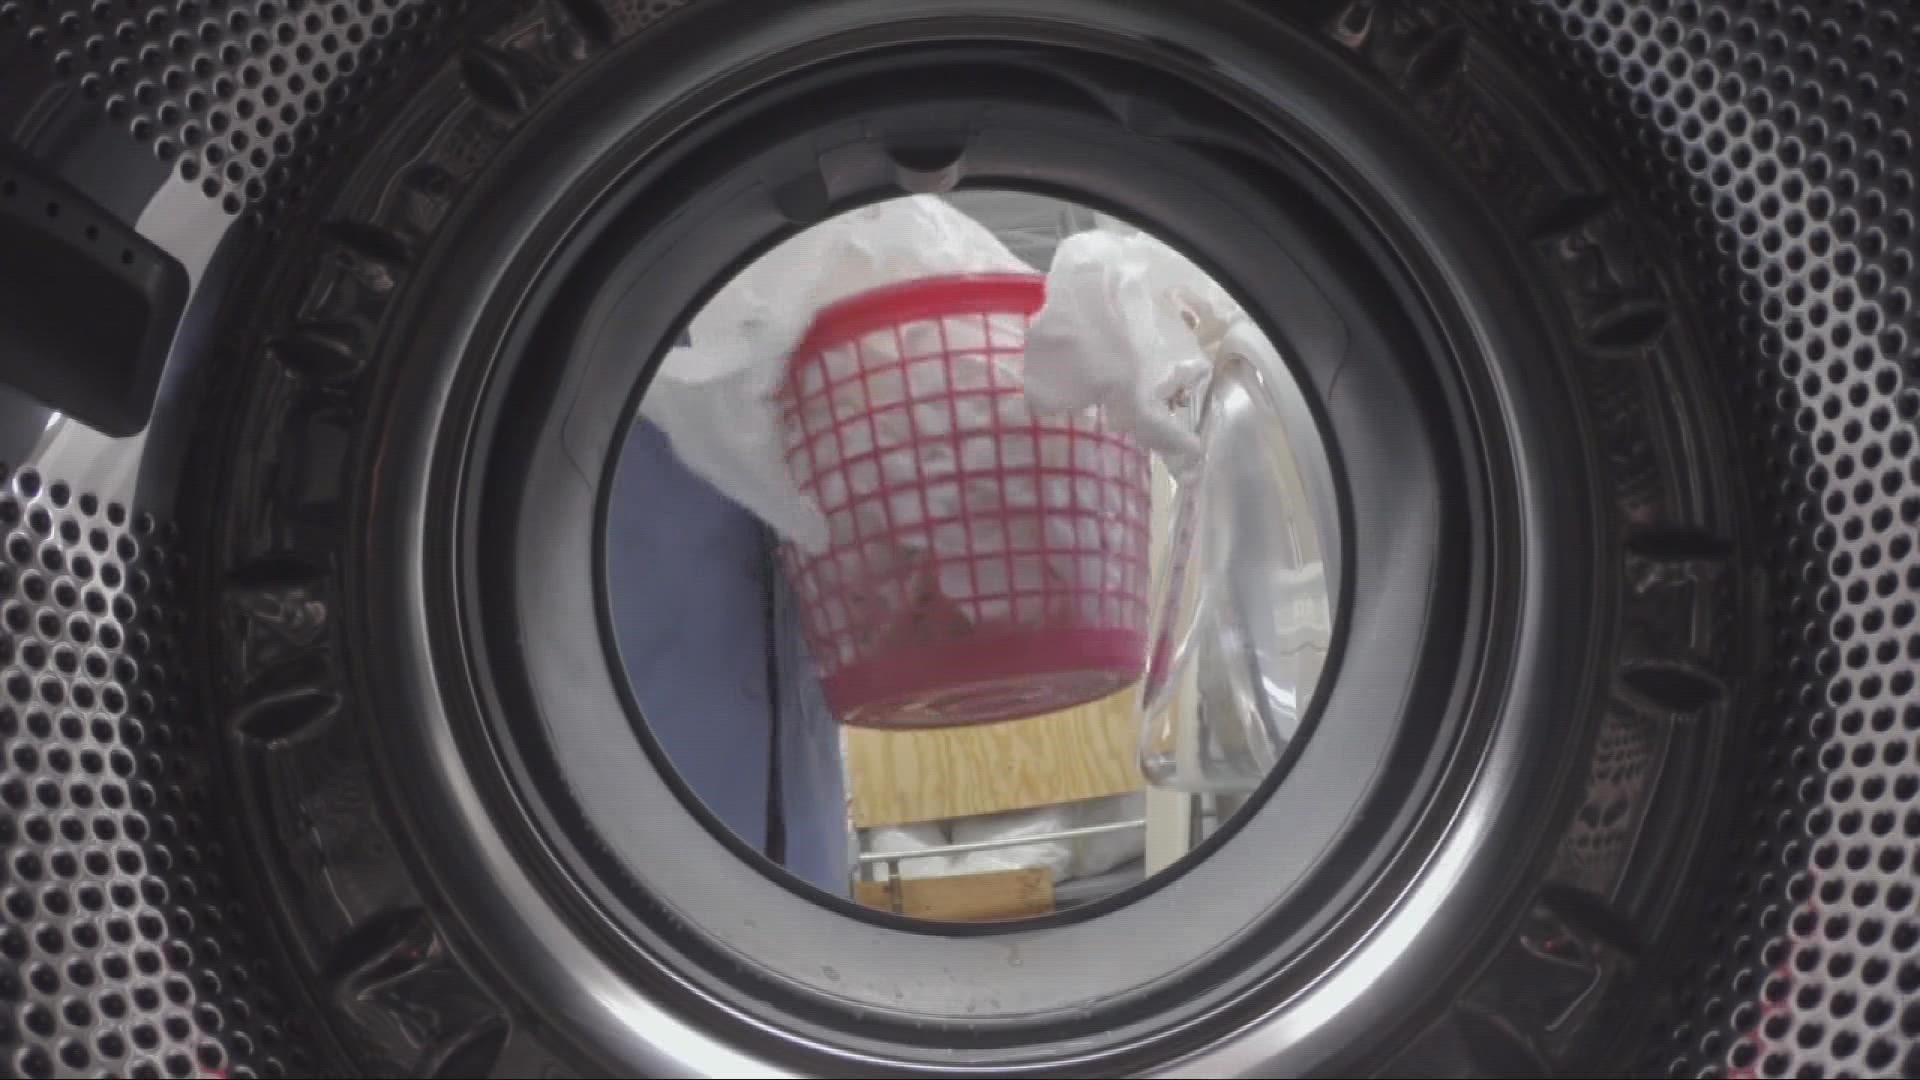 Consumer Reports says using a high-efficiency washer and dryer is one of the most important things you can do in terms of reducing your energy bills.